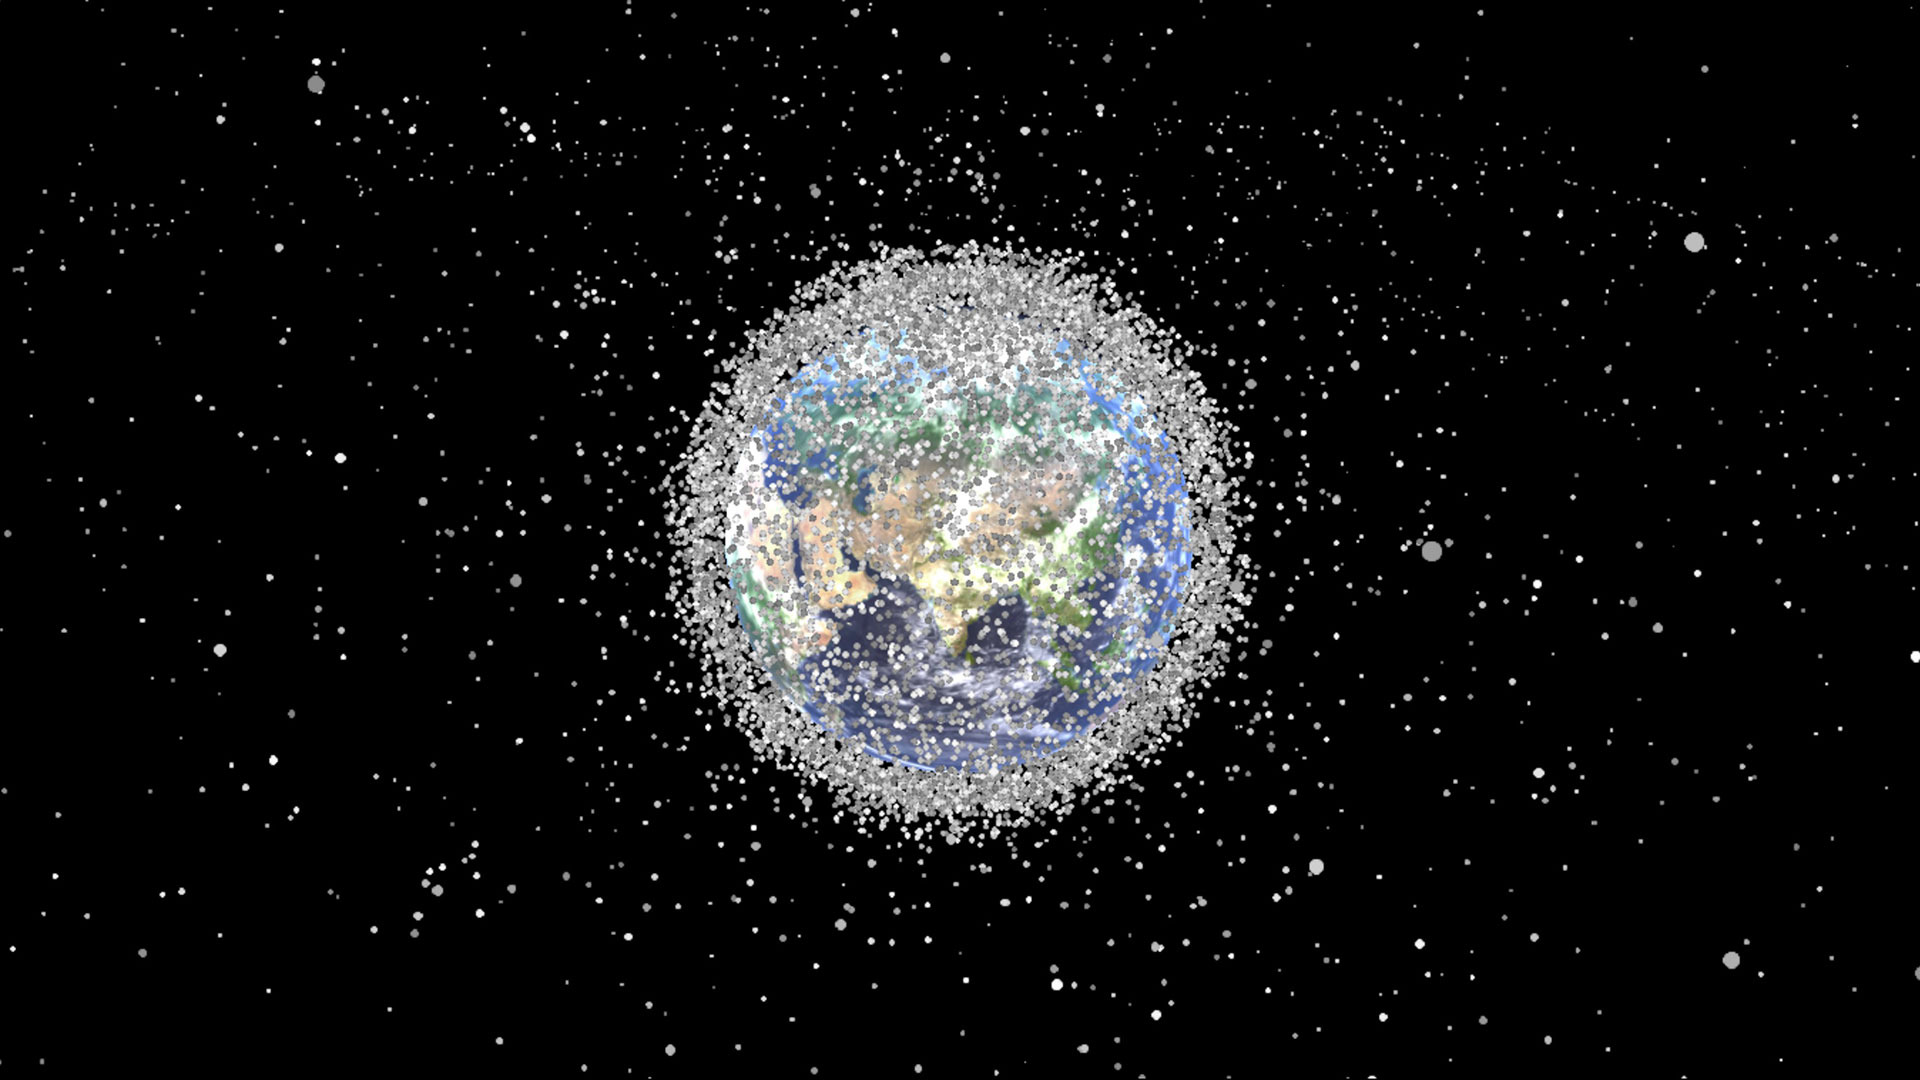 Images of Earth Surrounded in Space Junk Natural Environment